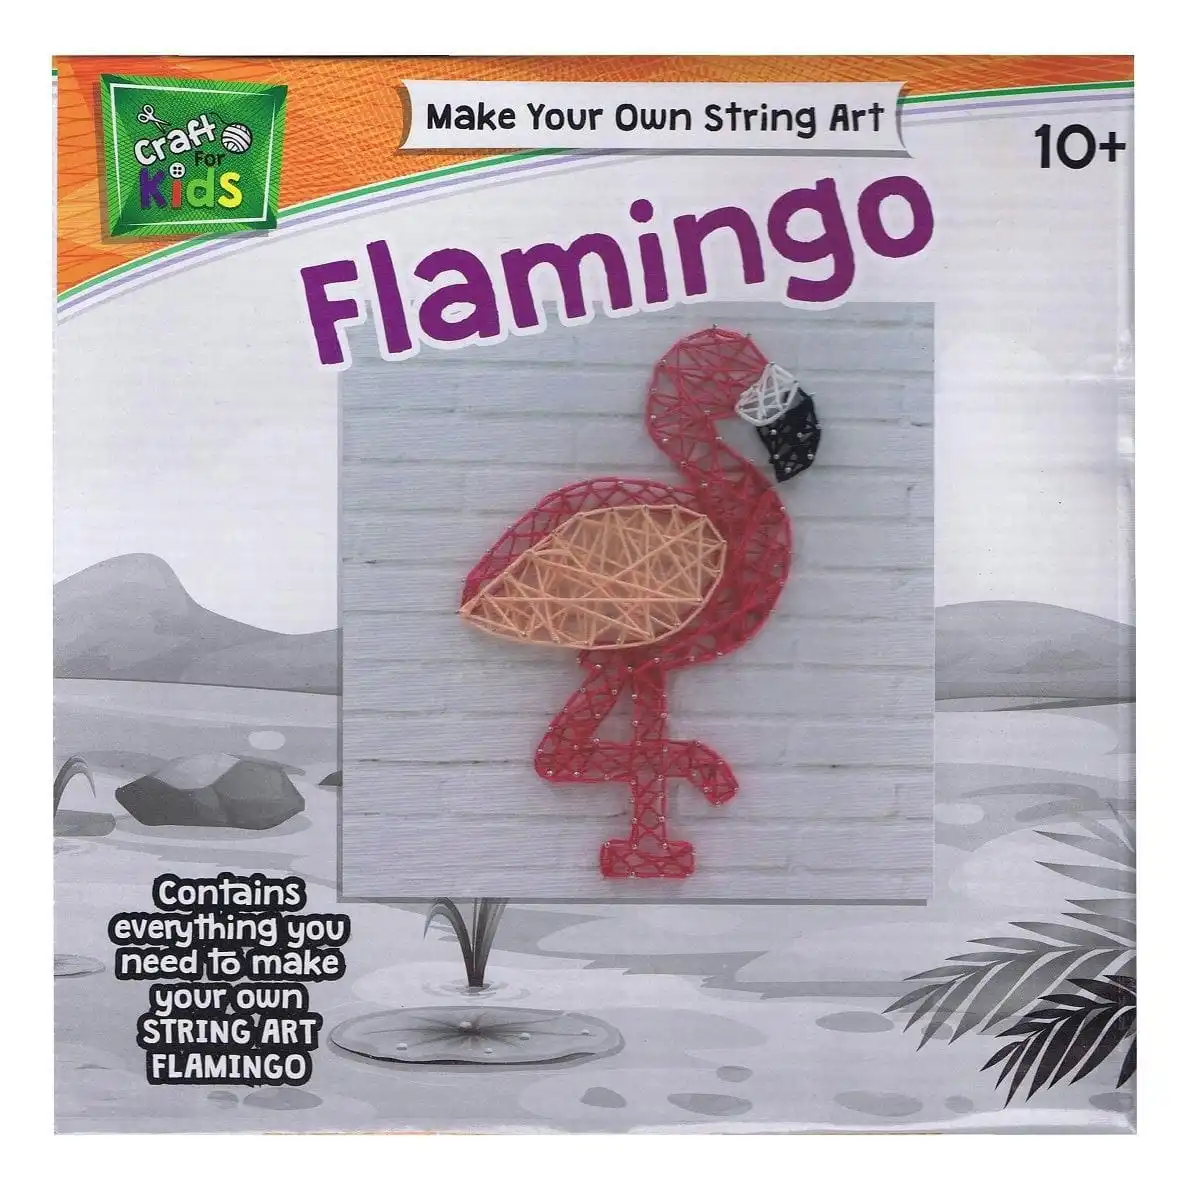 Craft for Kids Make Your Own String Art Flamingo